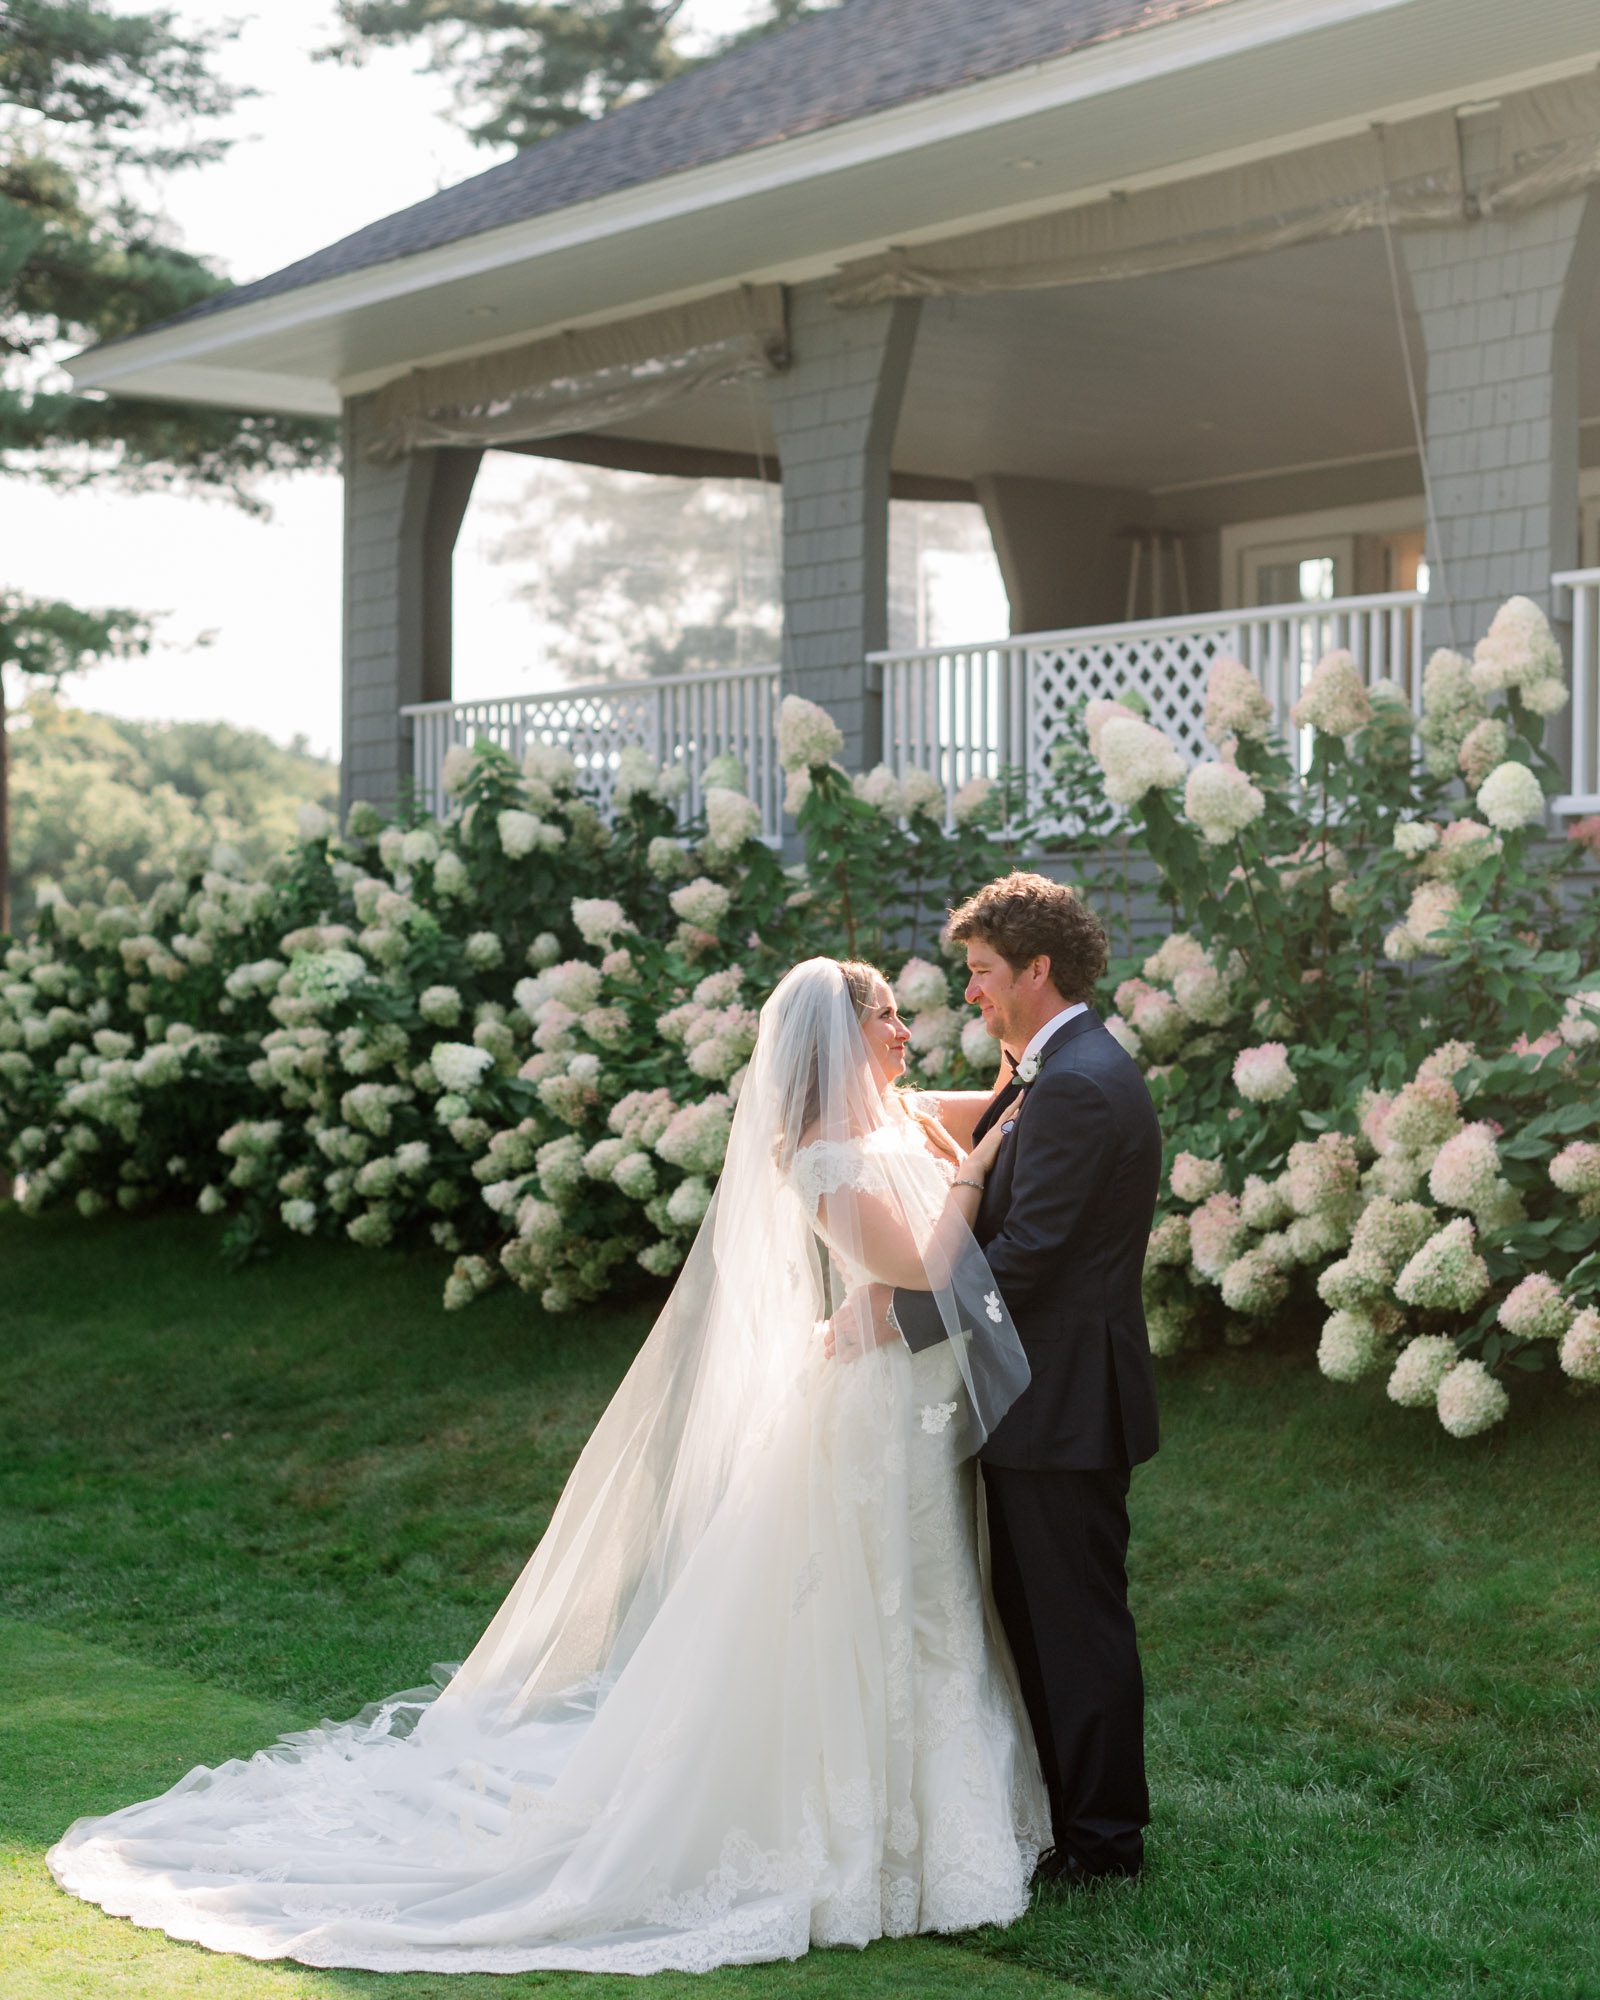 York Golf and Tennis club wedding photos in York Maine. Bride and groom glowing in the sunlight front of the club house.